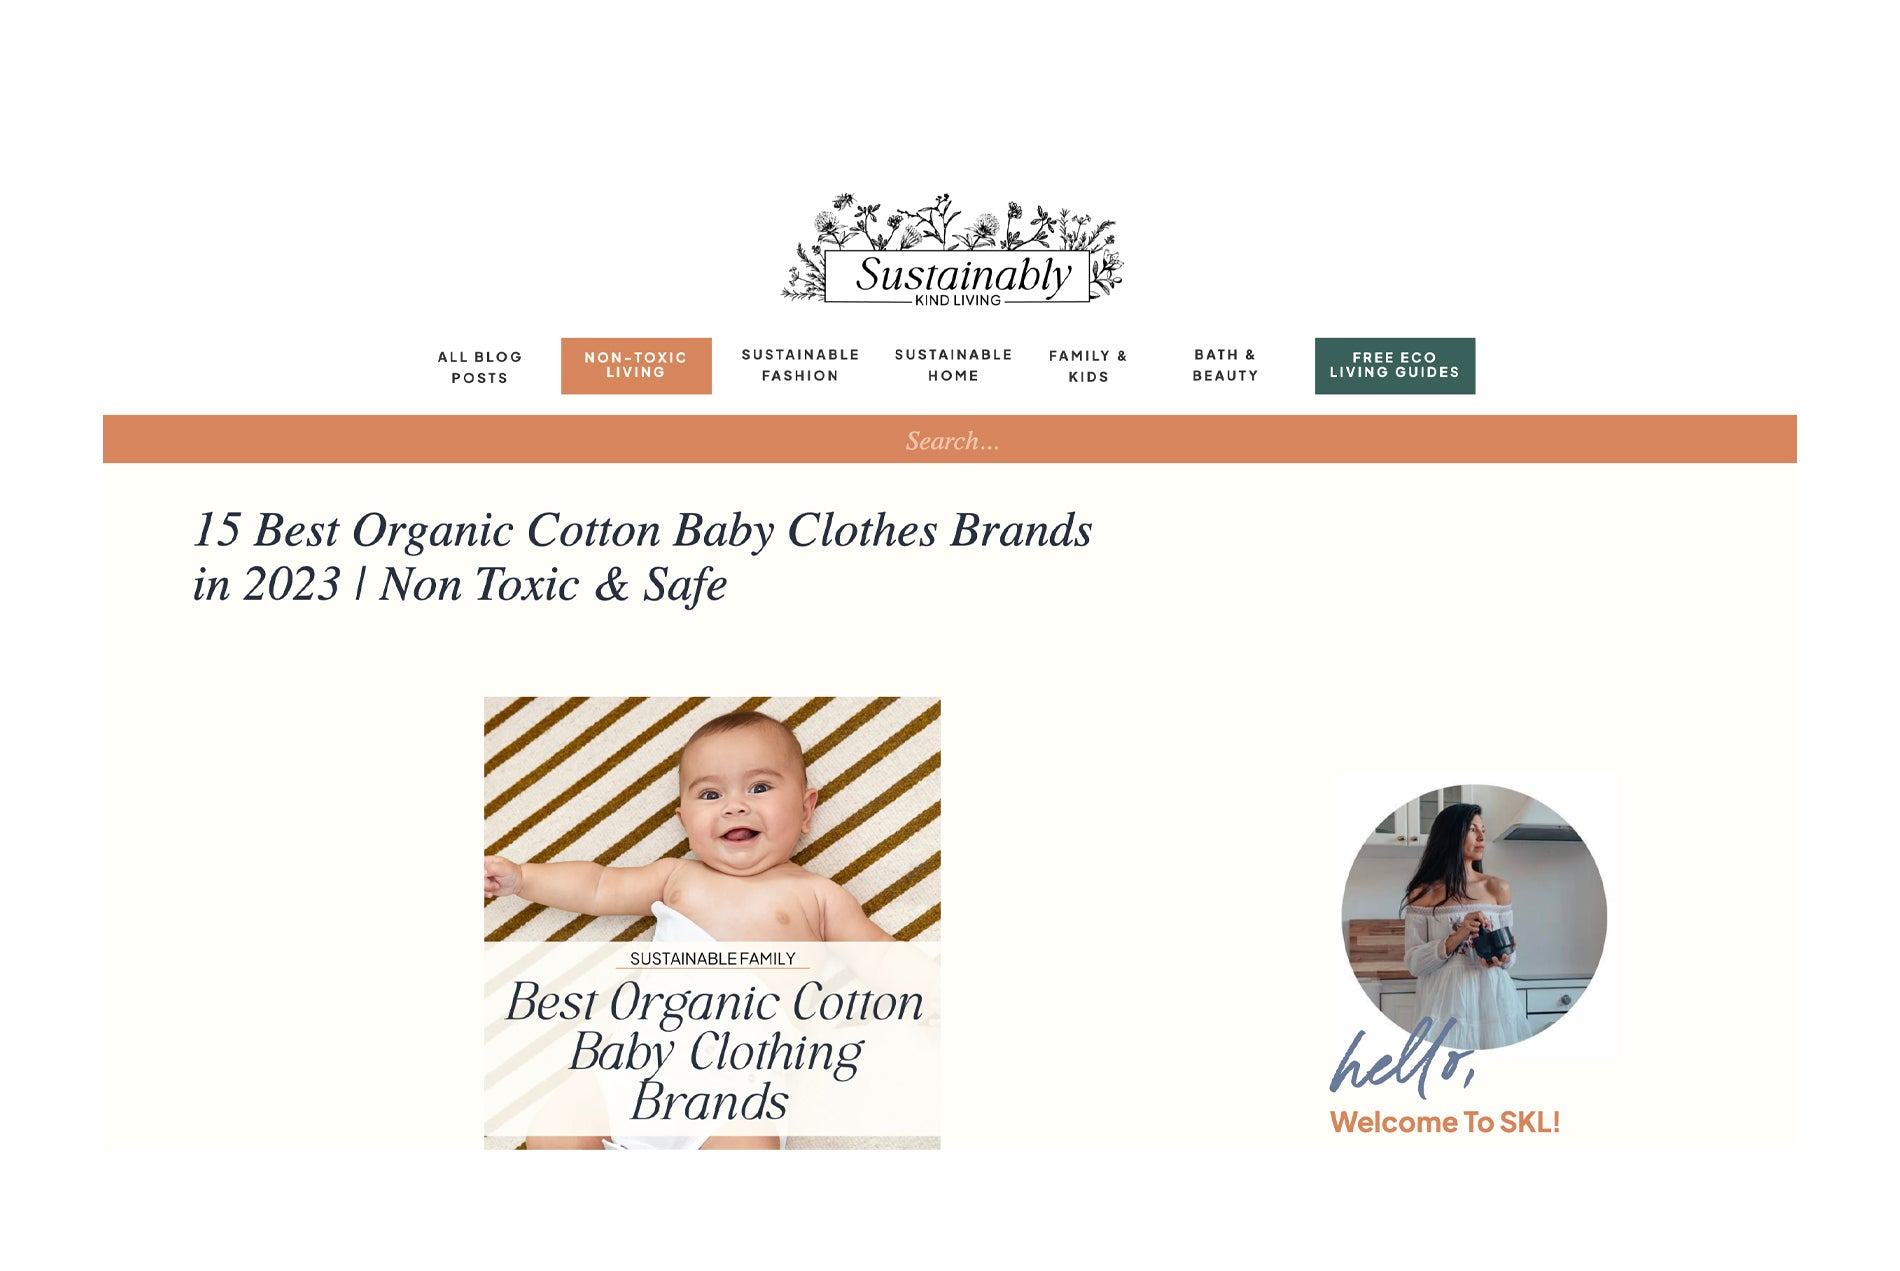 15 Best Organic Cotton Baby Clothes Brands in 2023